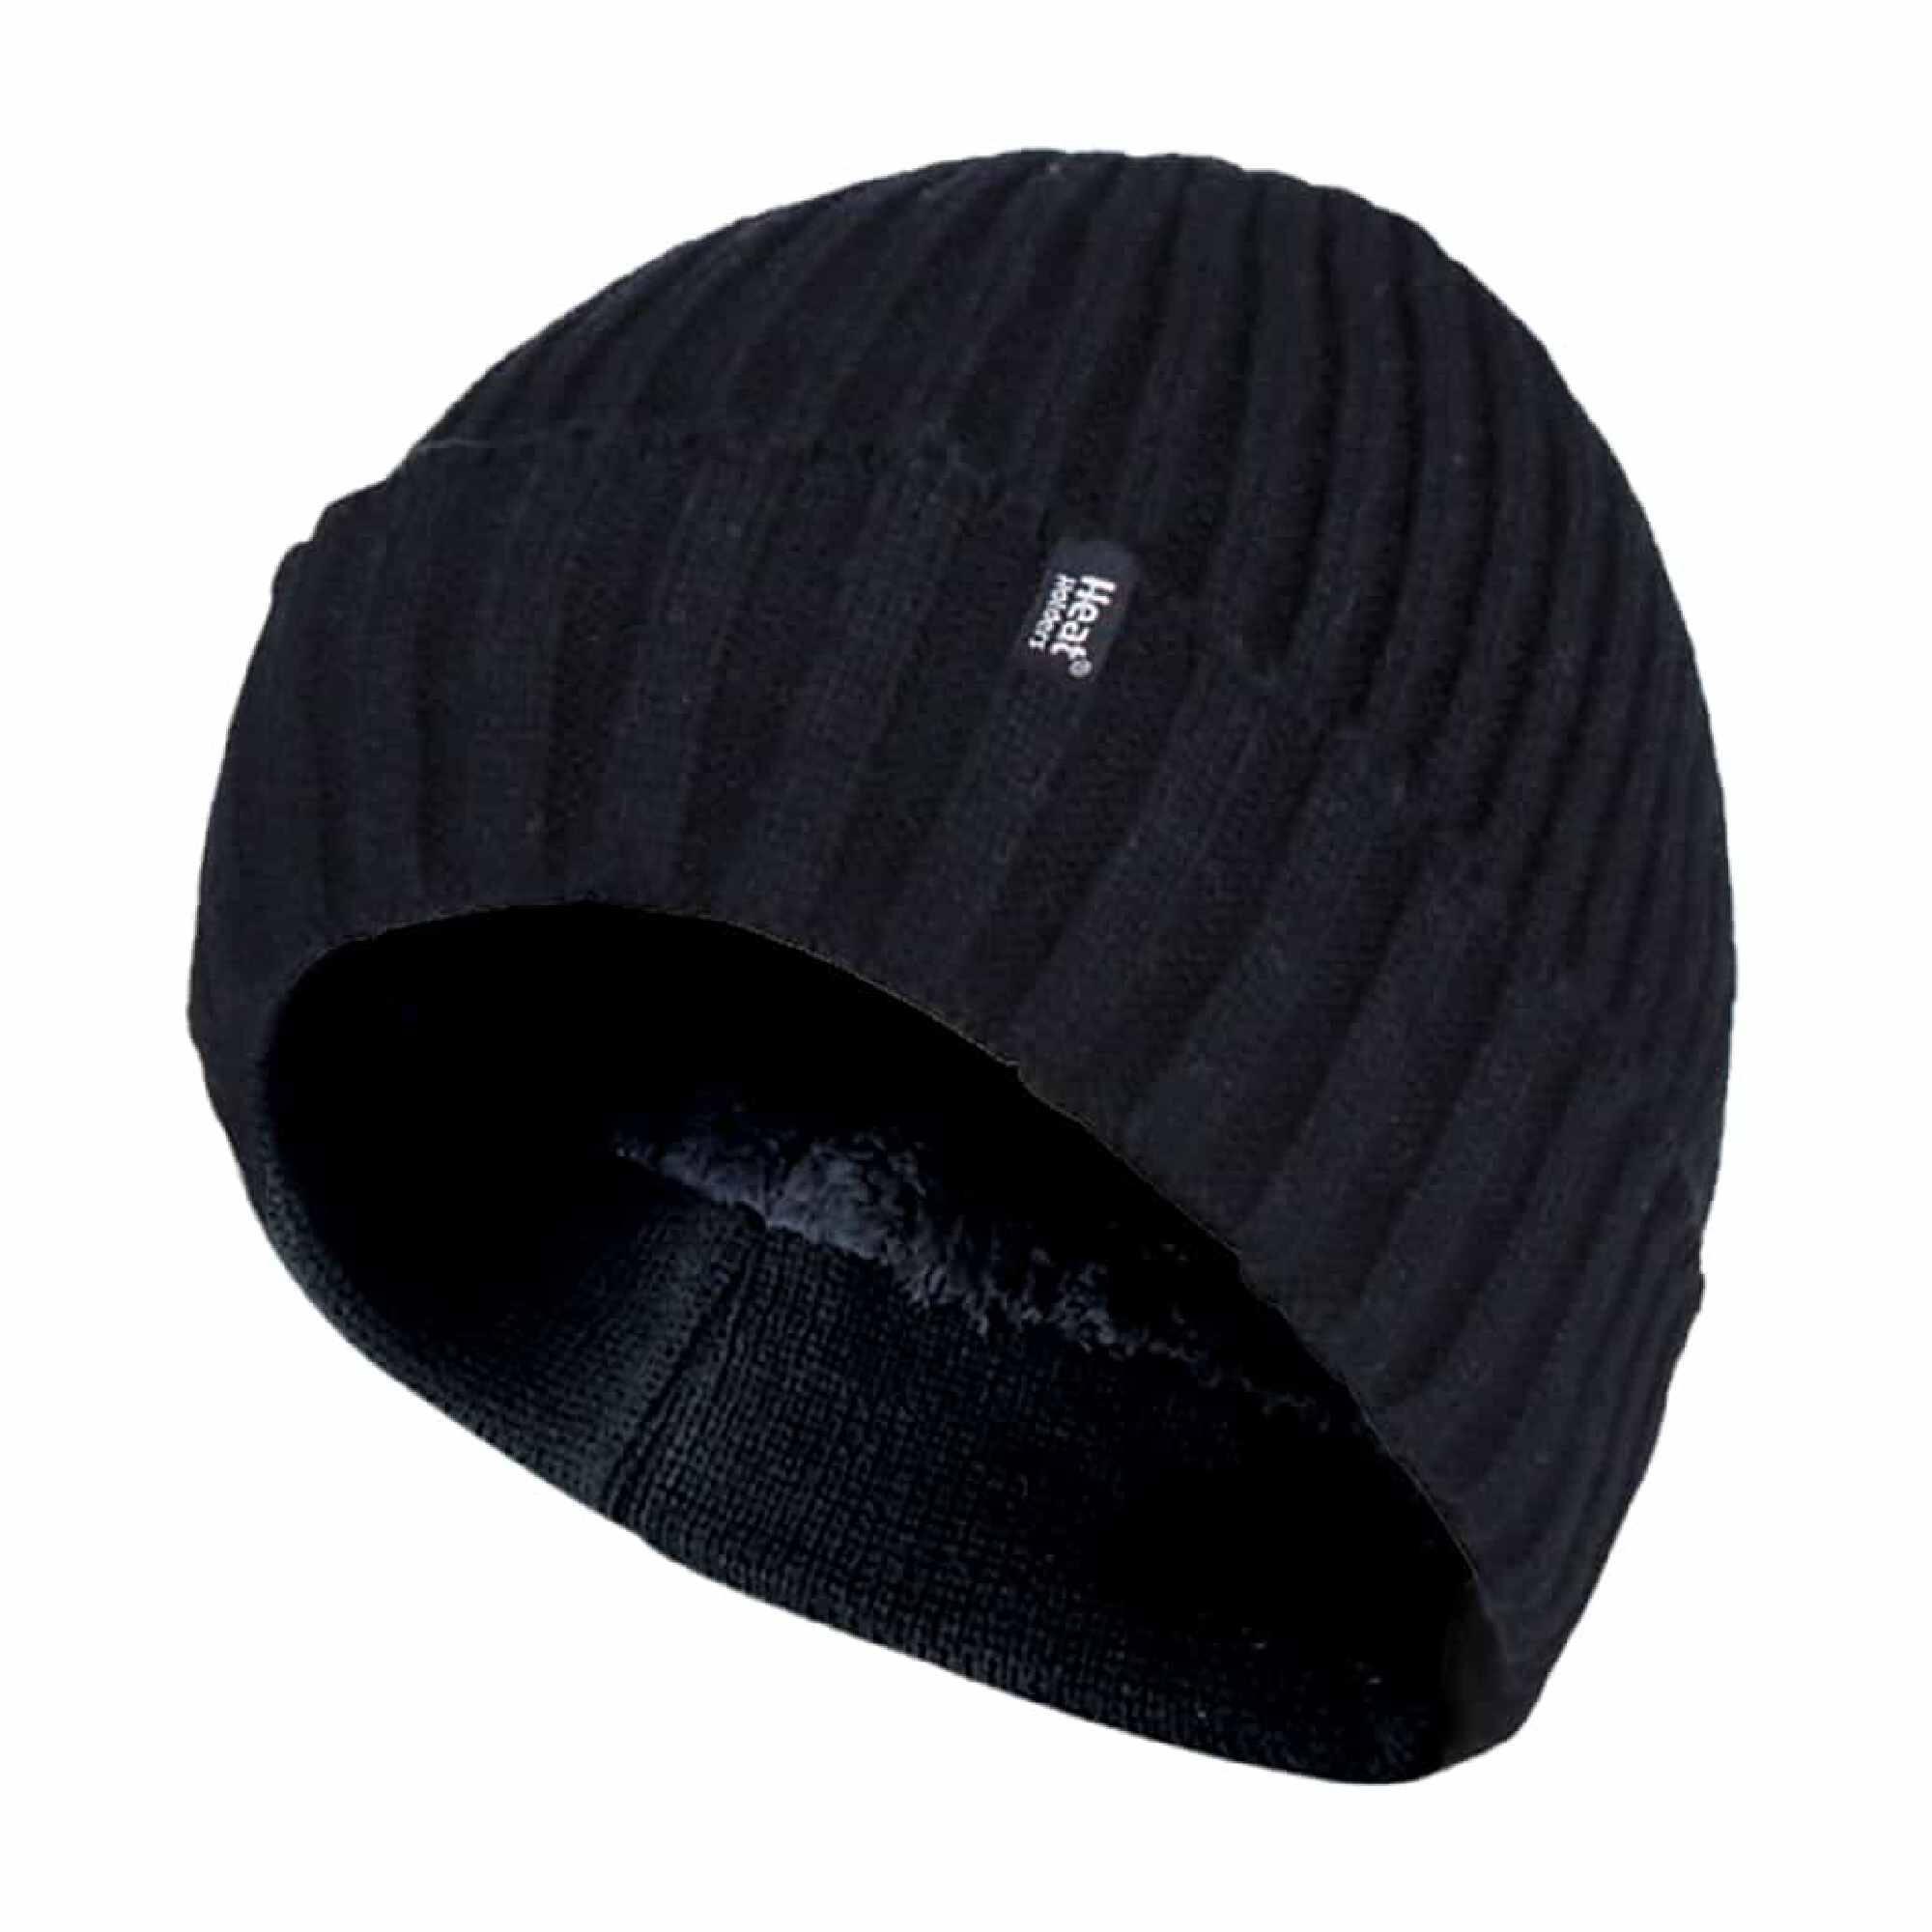 Mens 3.6 TOG Fleece Lined Thermal Turn Over Cuff Winter Beanie Hat 1/4